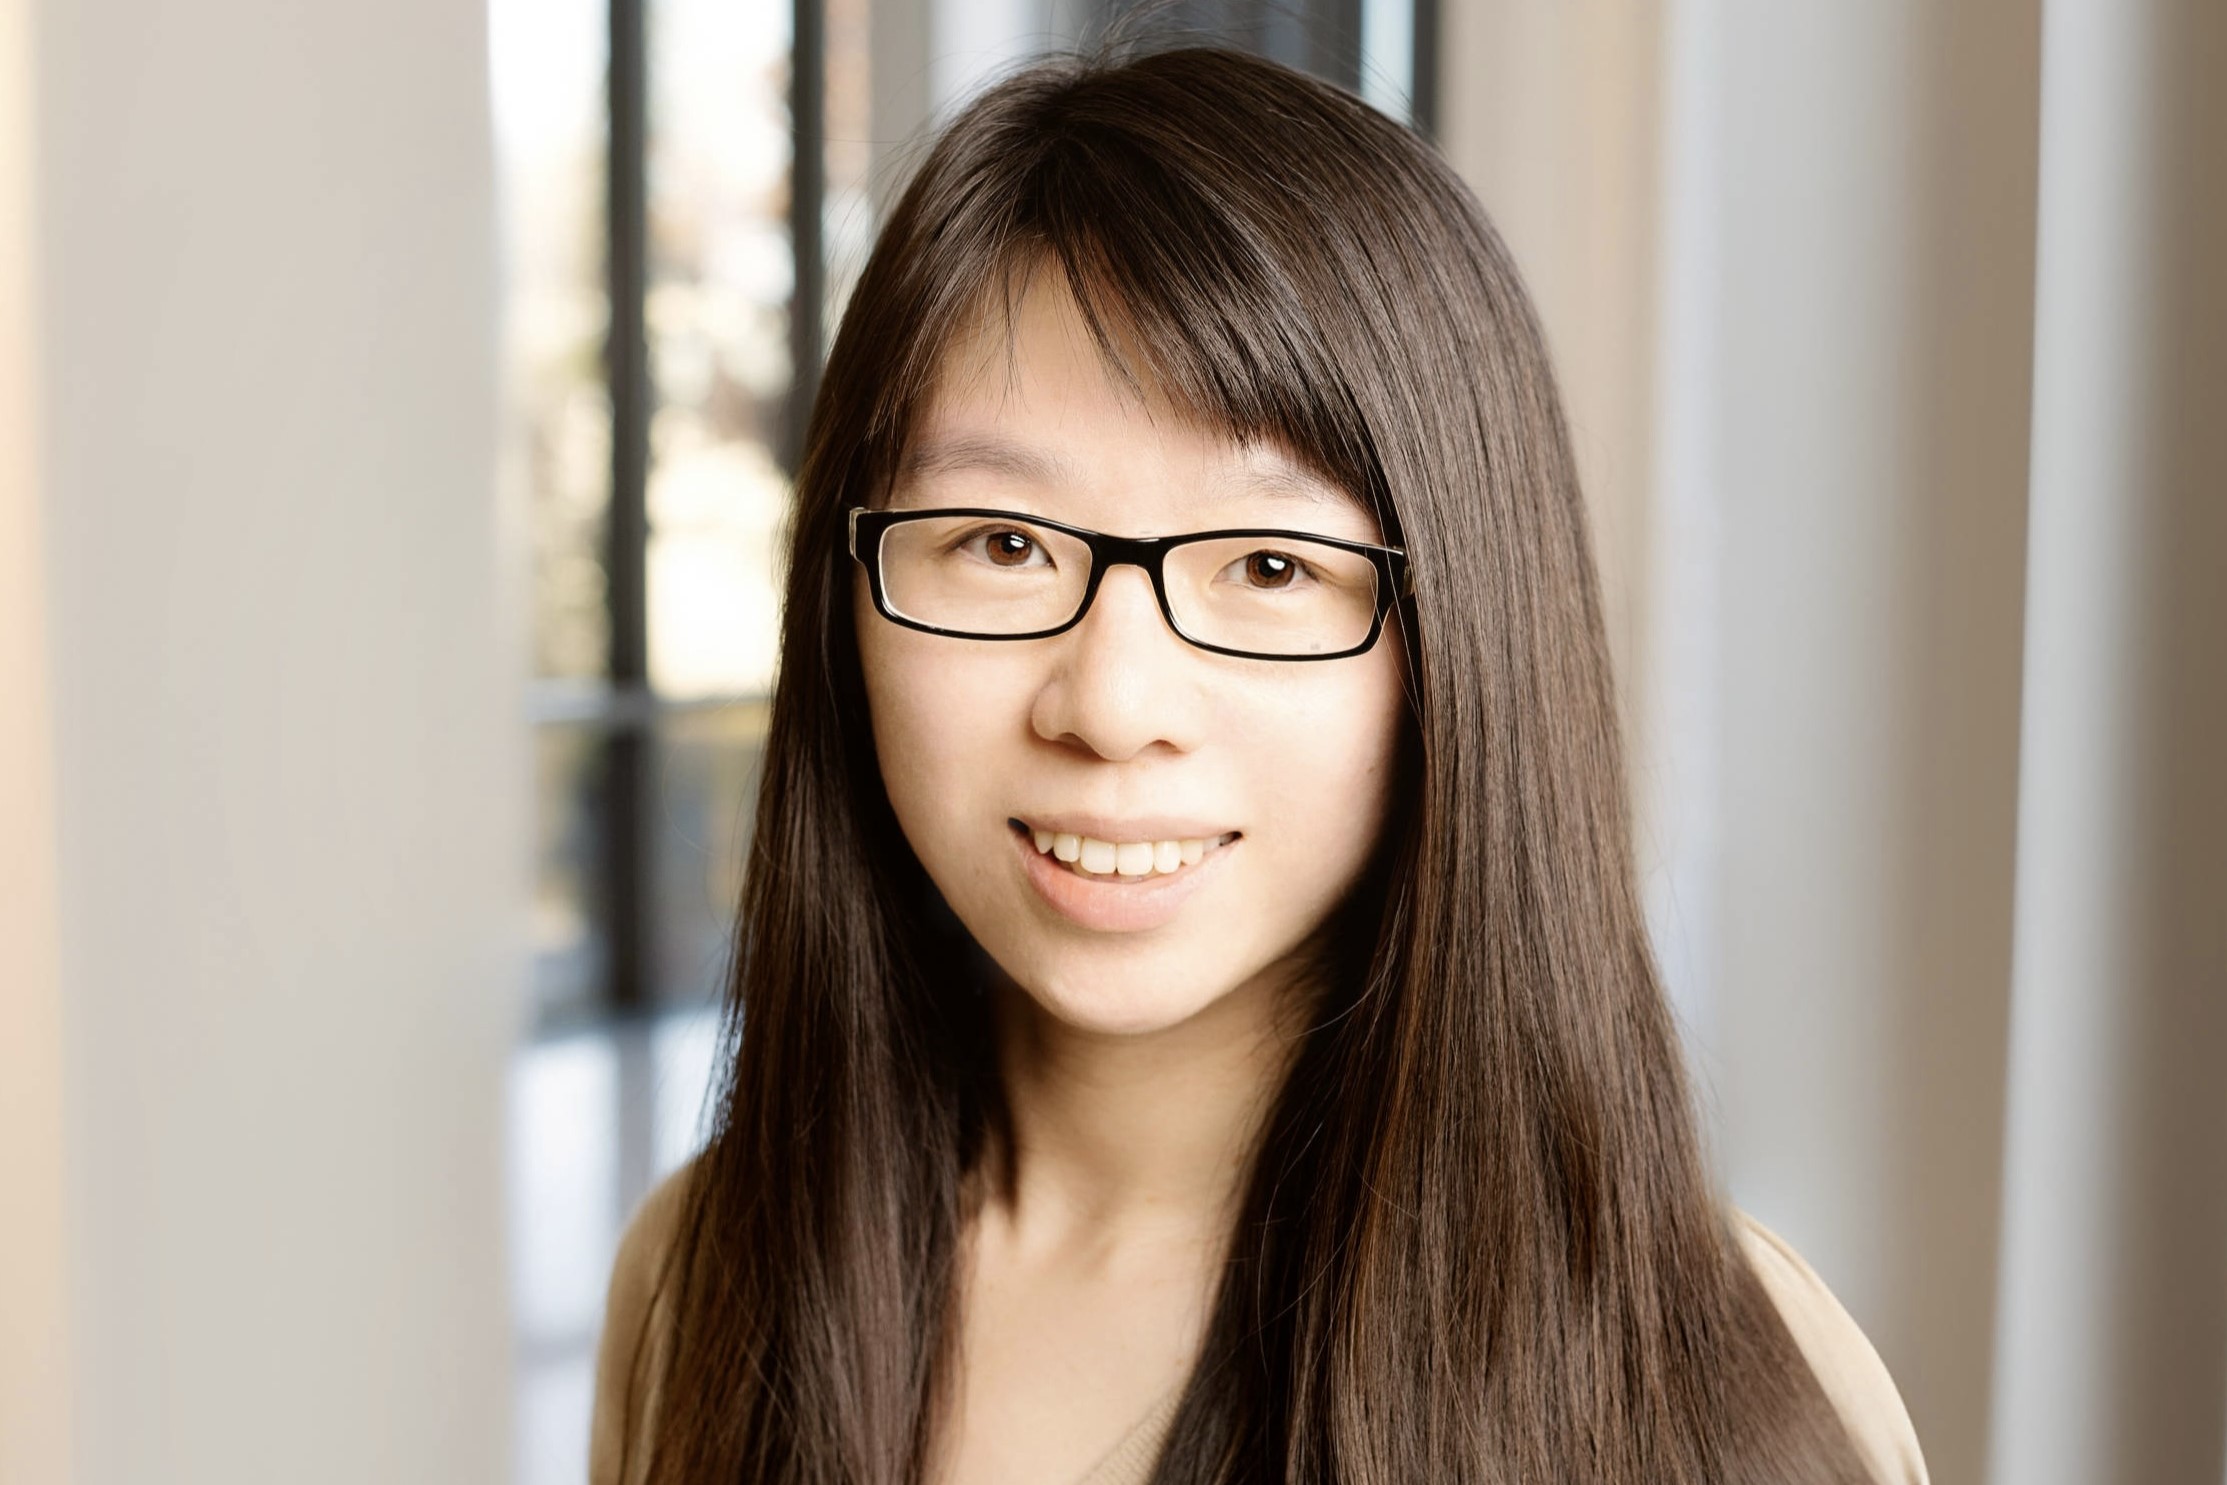 Xiaojing Liao. Photo courtesy of the Luddy School of Informatics, Computing and Engineering